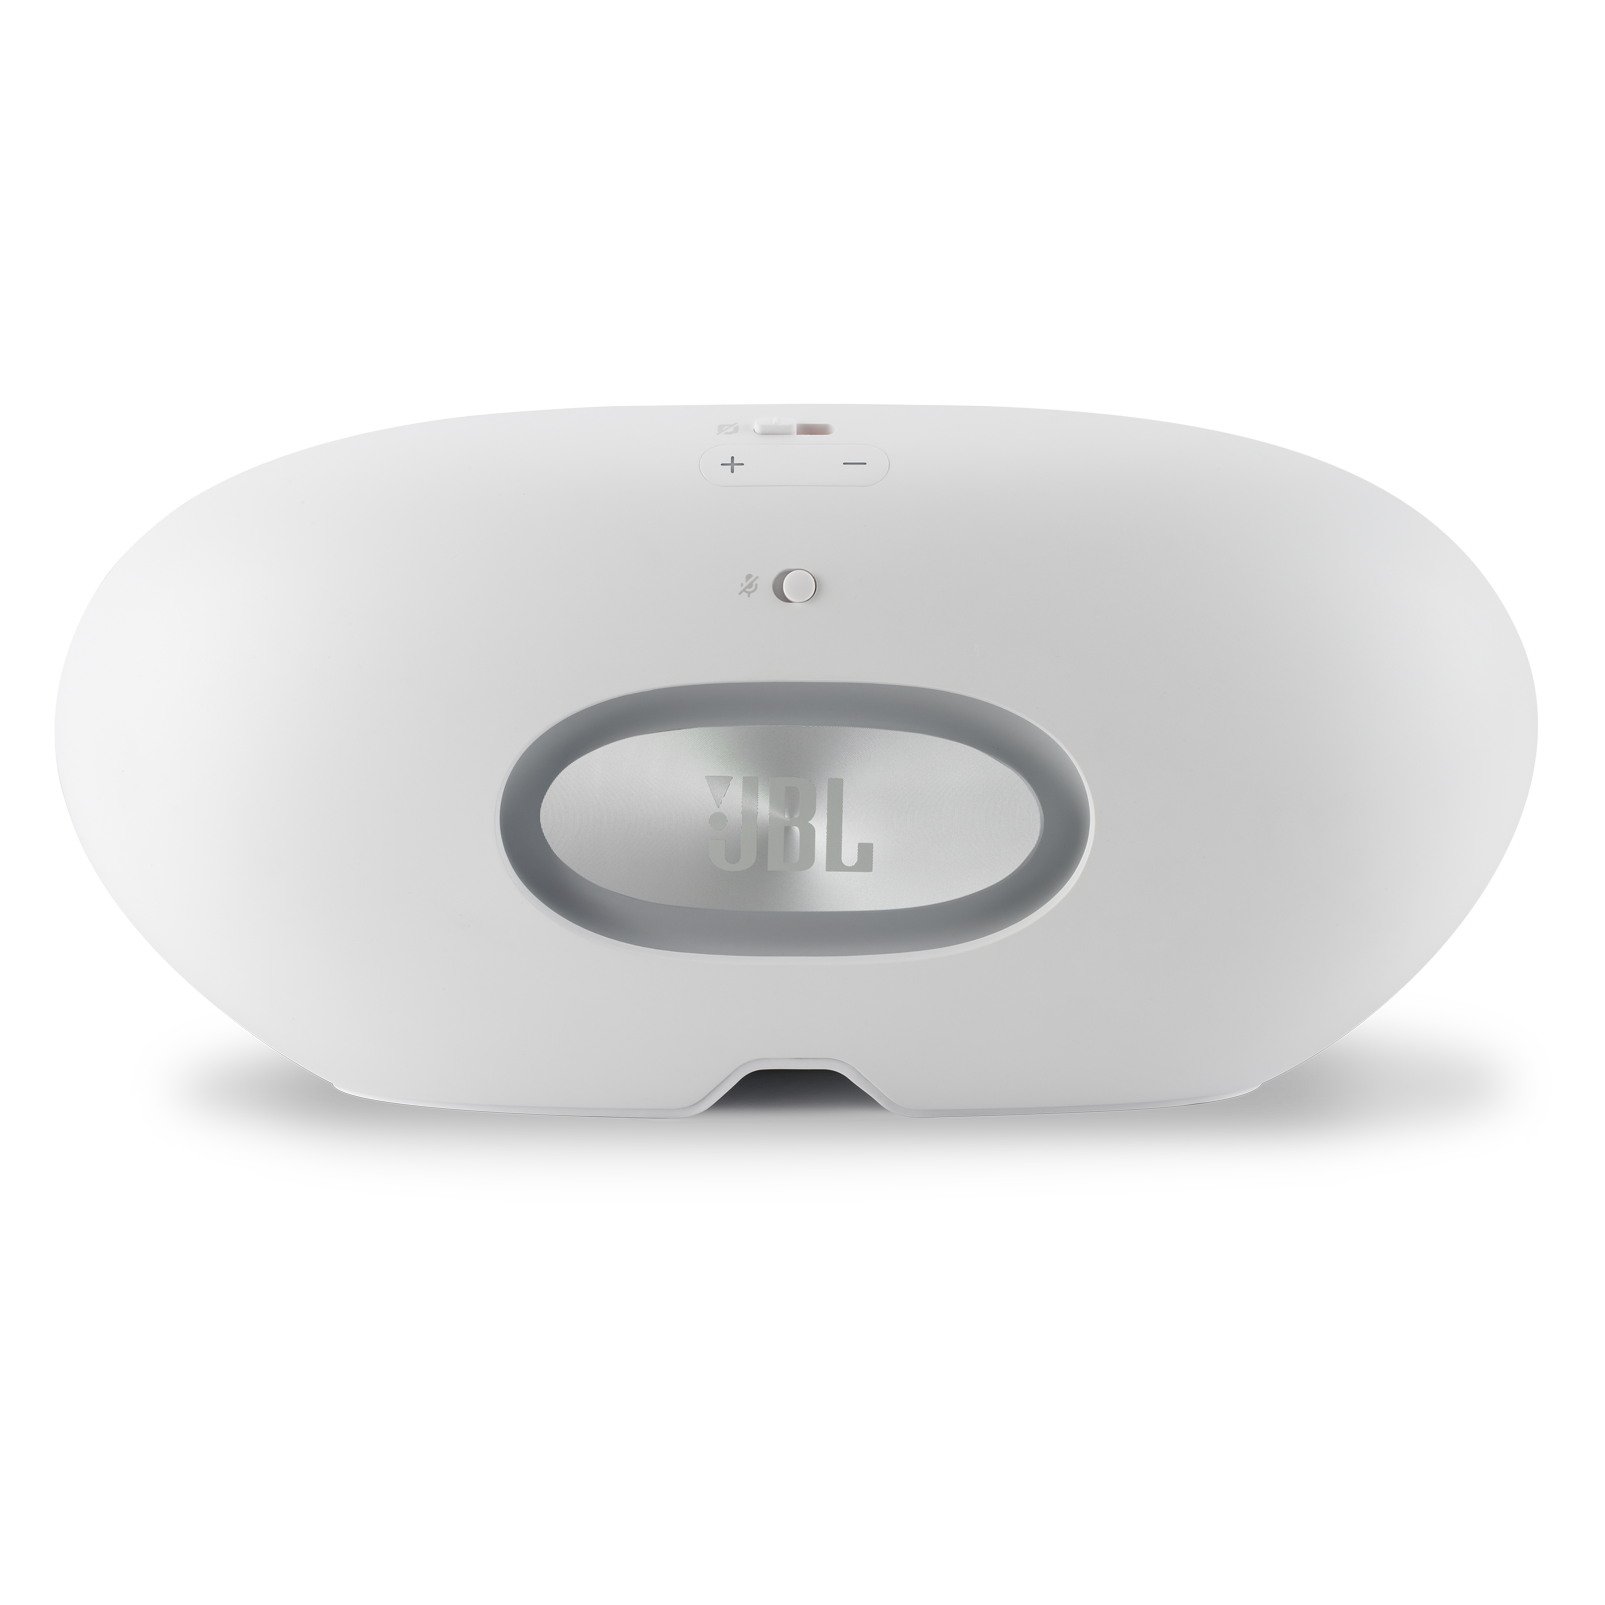 JBL LINK VIEW - White - JBL legendary sound in a Smart Display with the Google Assistant. - Back